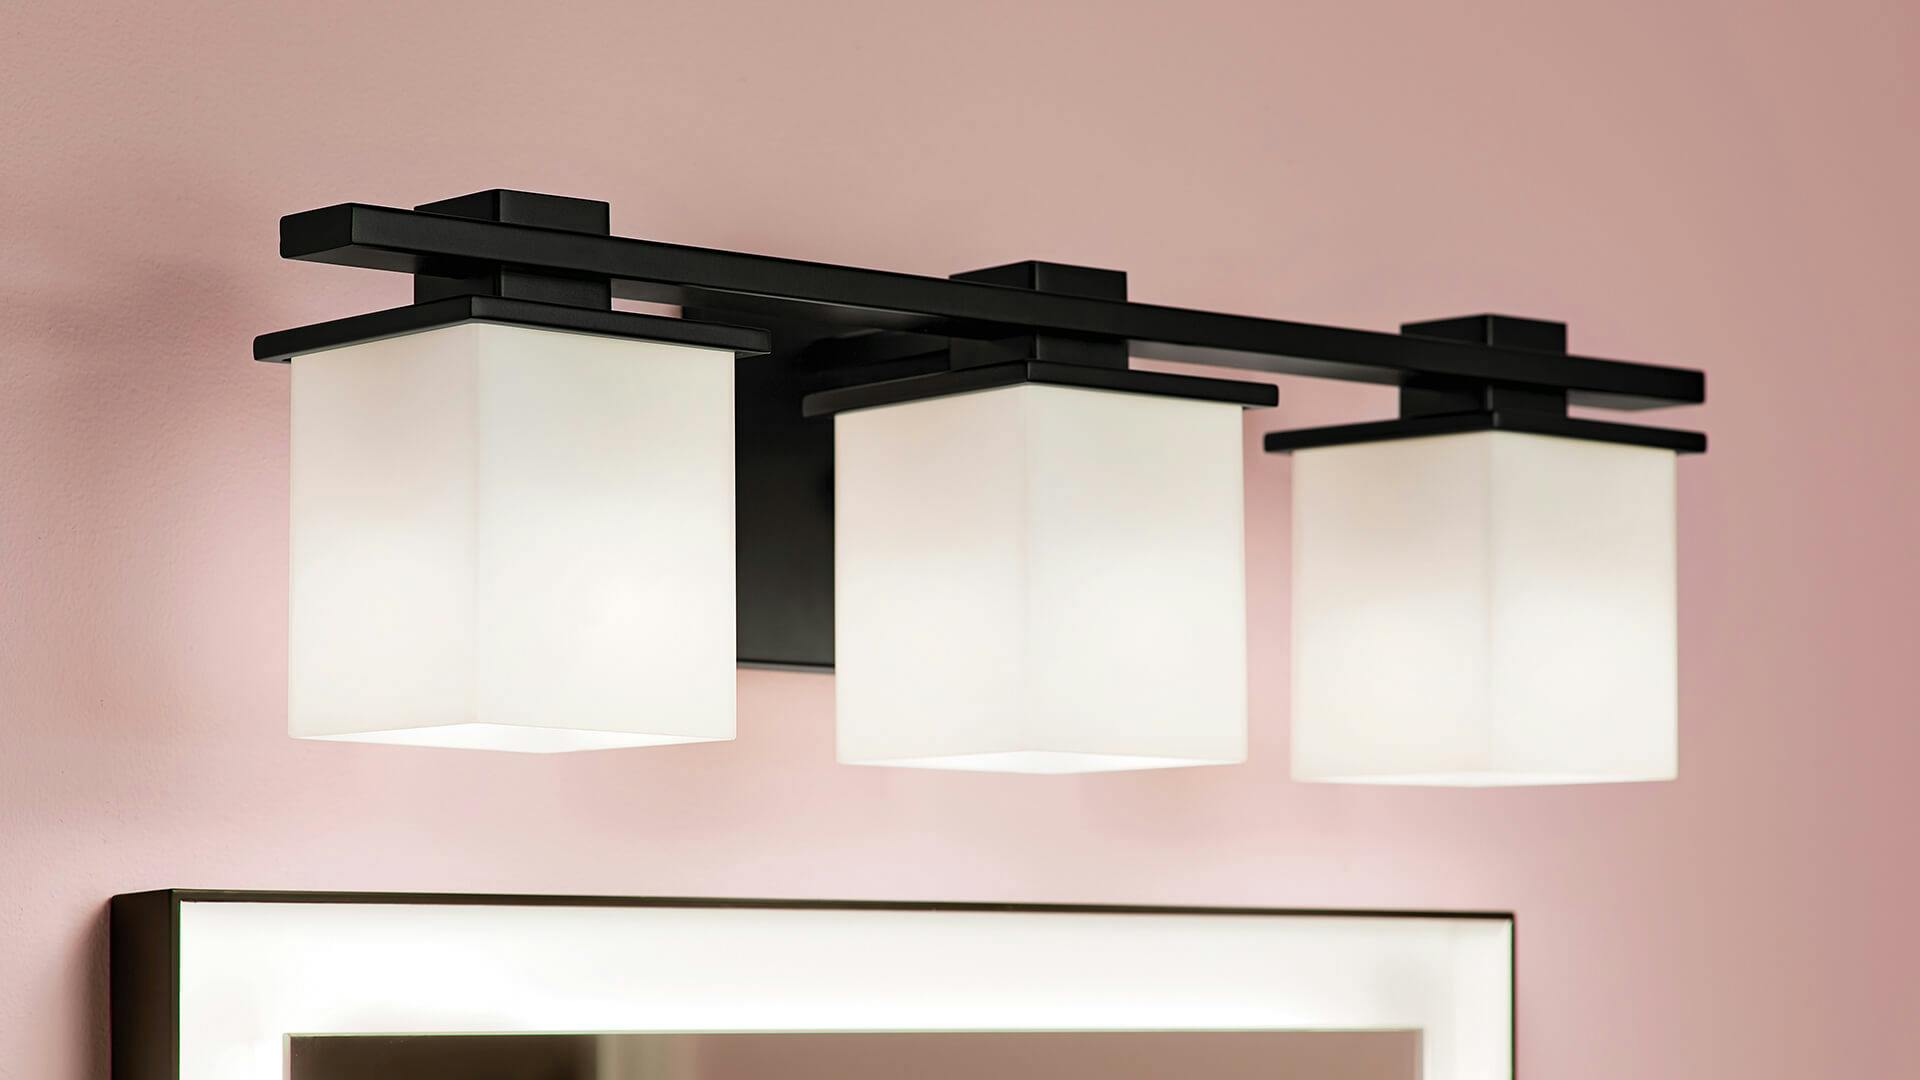 Close up of a Tully sconce light in black finish above a bathroom mirror with a pale pink wall